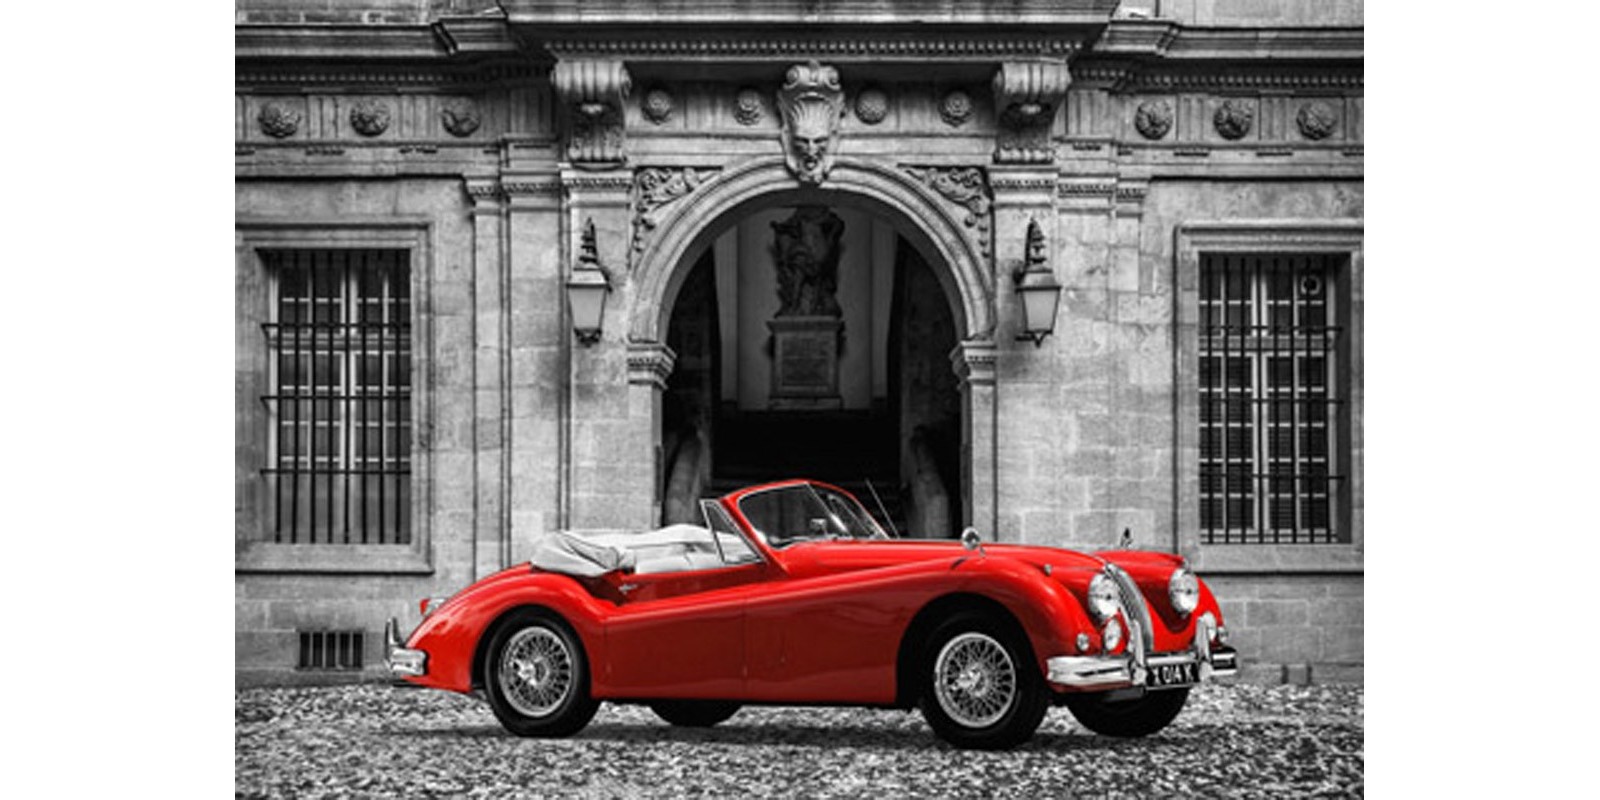 Gasoline Images - Luxury Car in front of Classic Palace